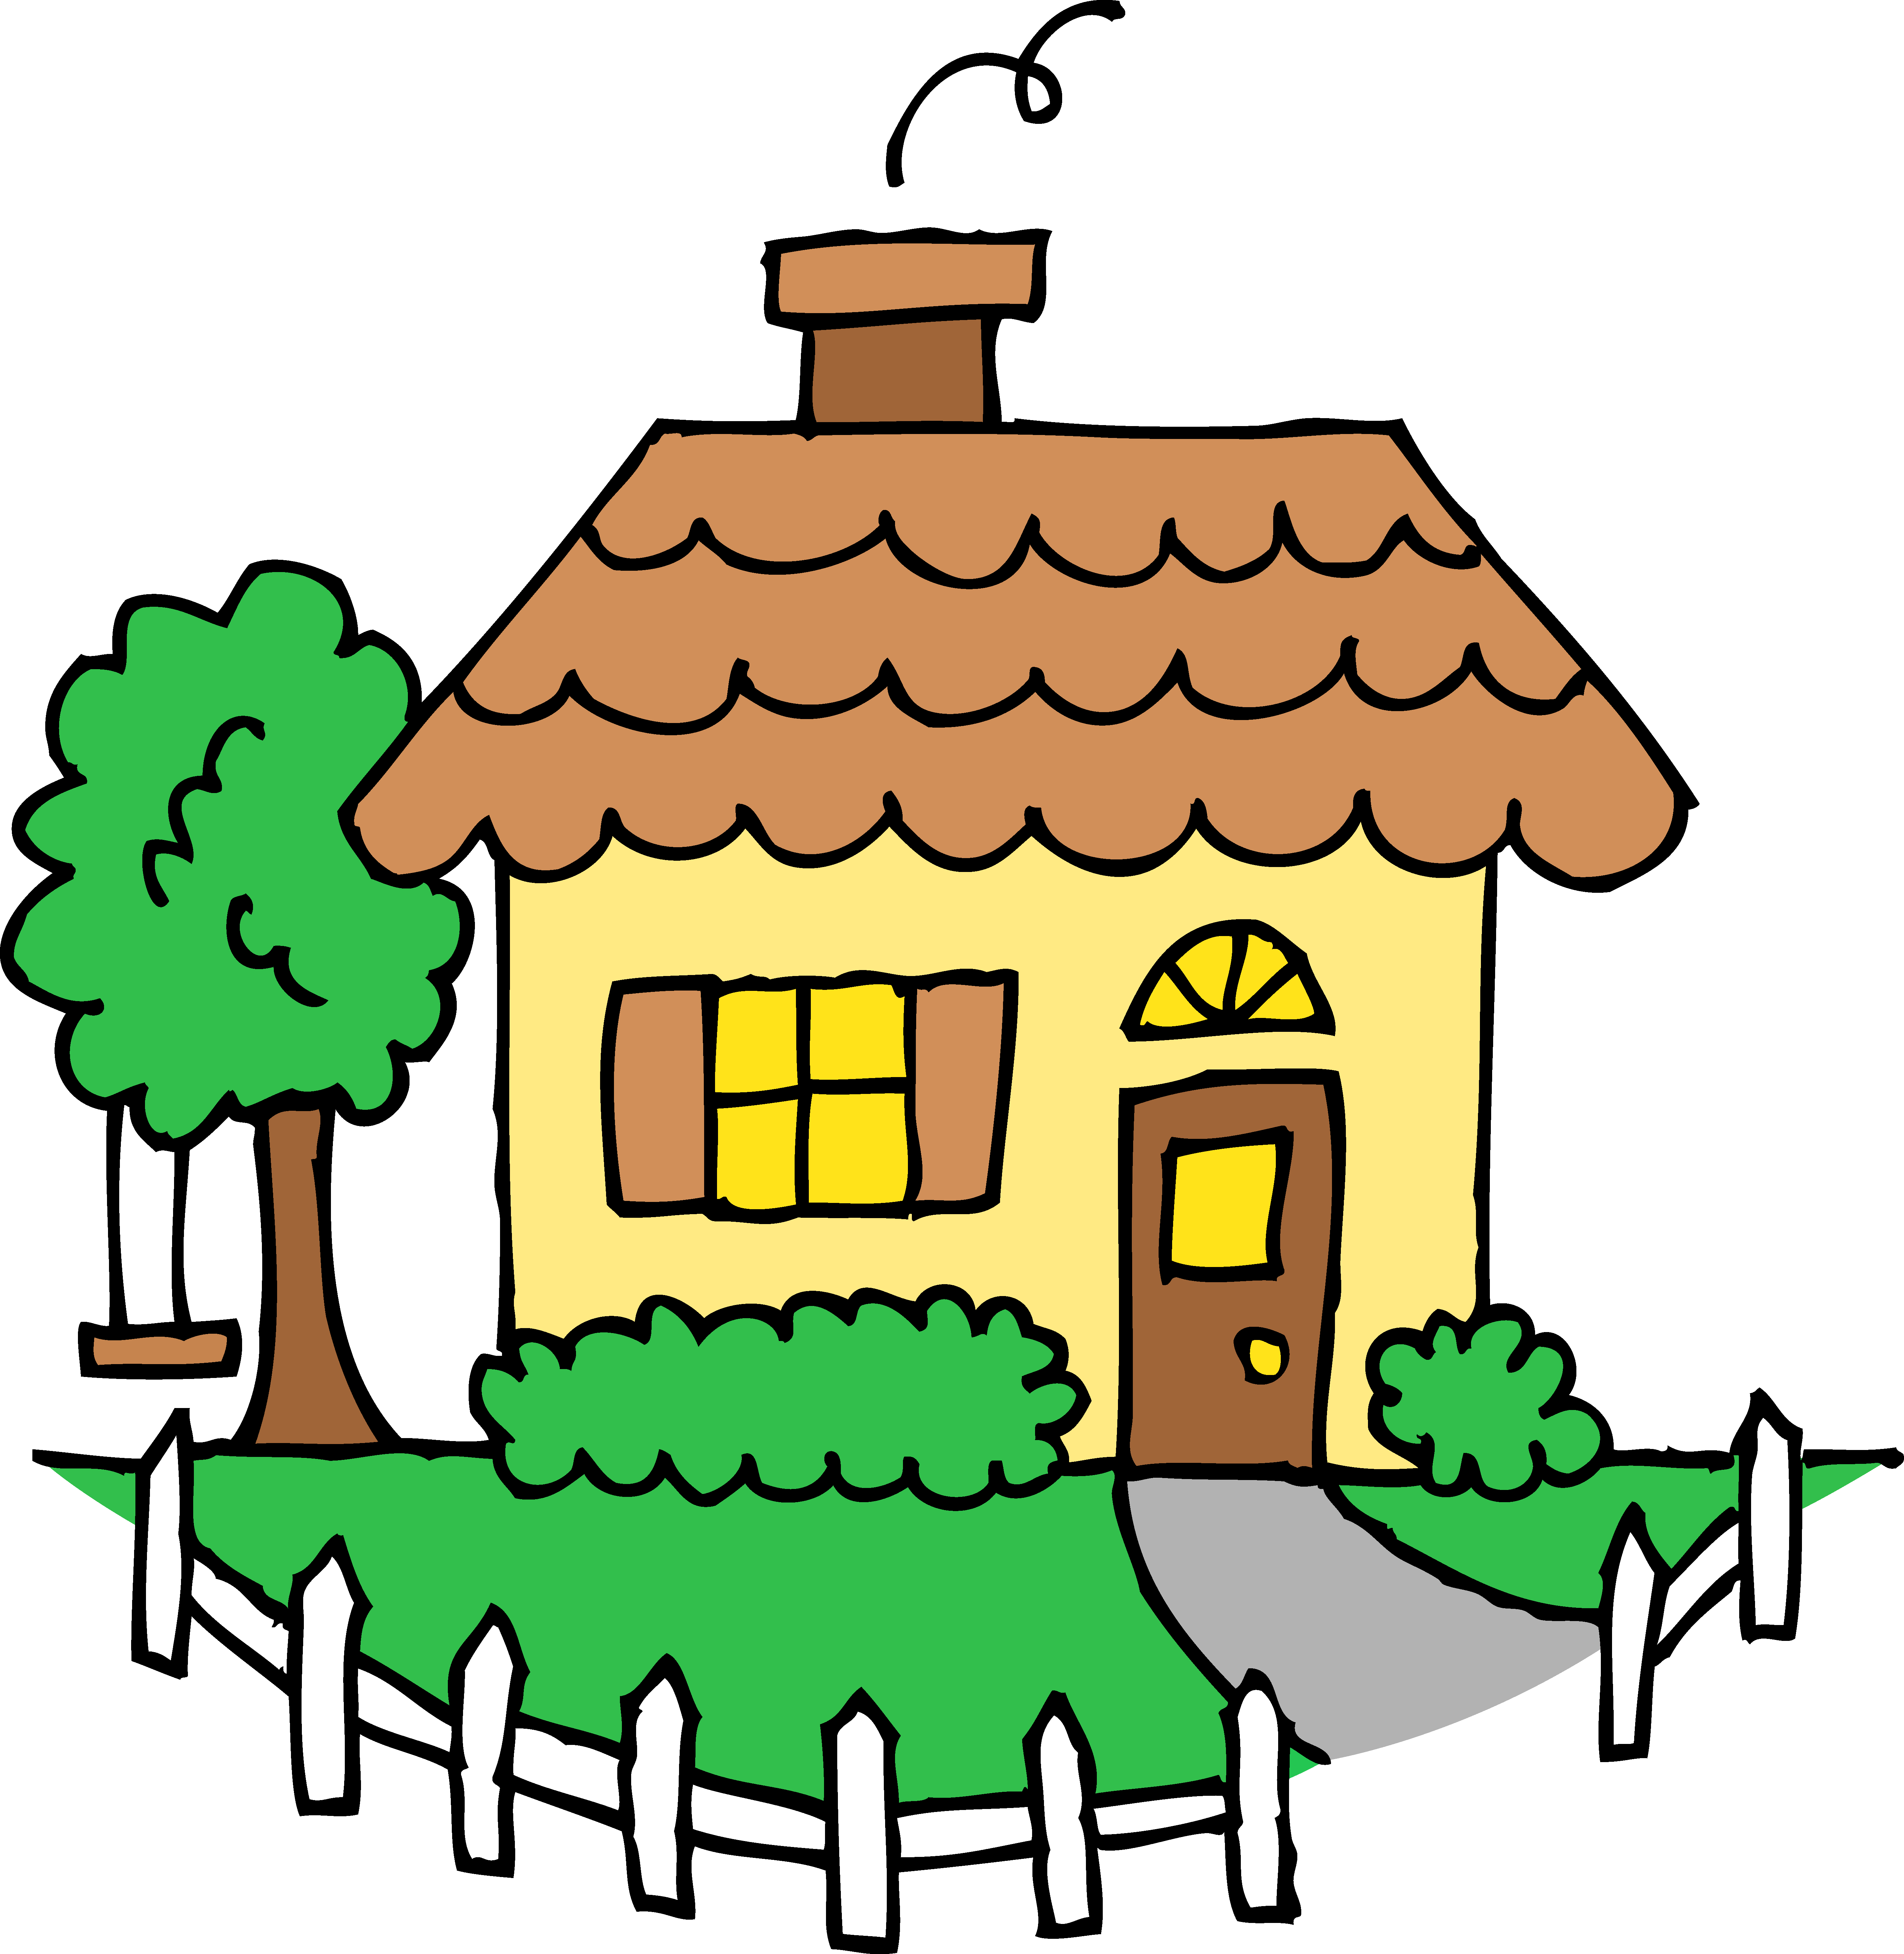 Free House Clipart - cliparta - Clipart Of A House